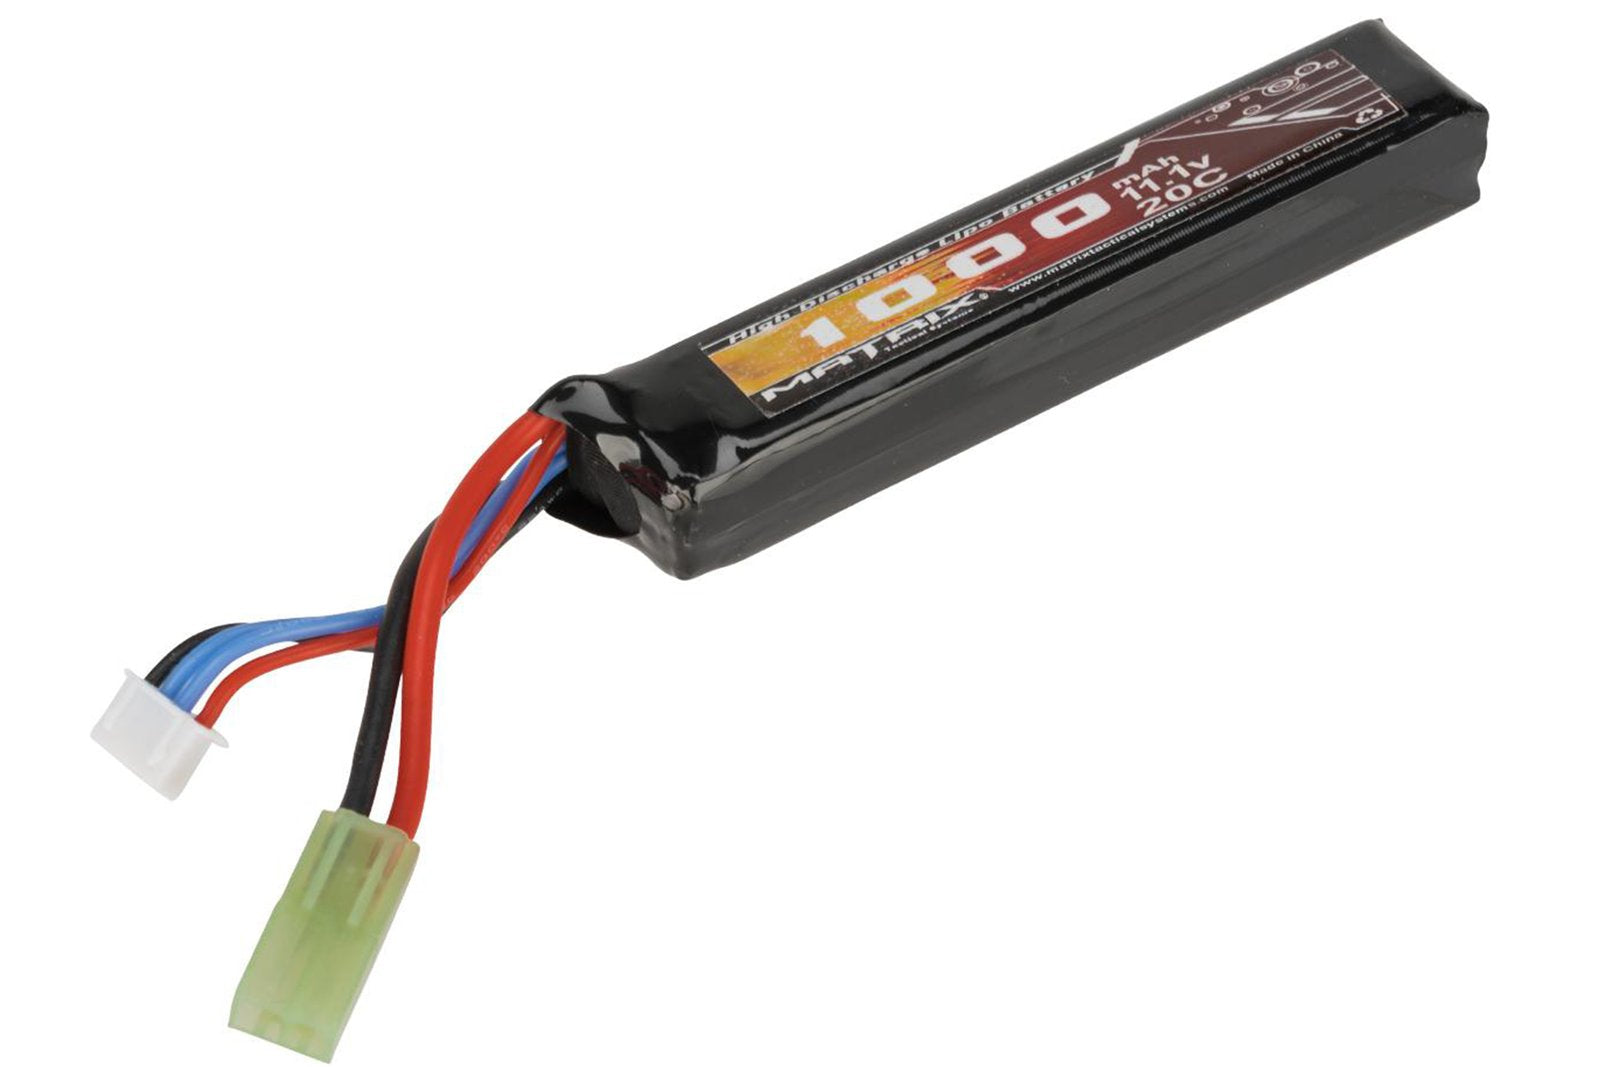 Matrix High Performance 11.1V Stick Type Airsoft LiPo Battery (Configuration: 1000mAh / 20C / Deans & Short Wire) - Eminent Paintball And Airsoft